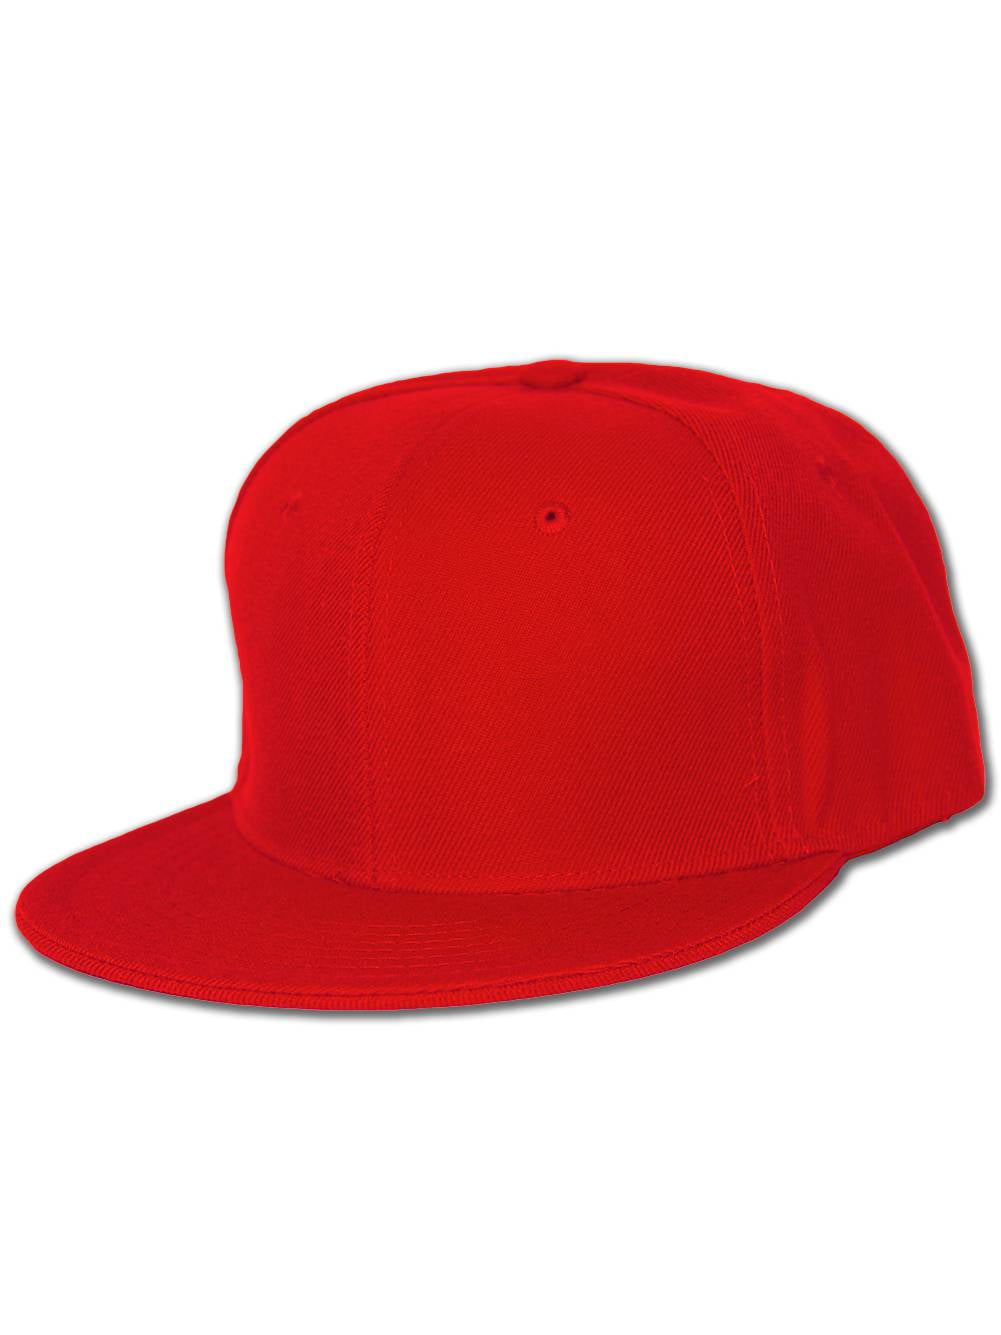 Flatbill Blank Flat Bill Baseball Hat More Colors Available 7 Red